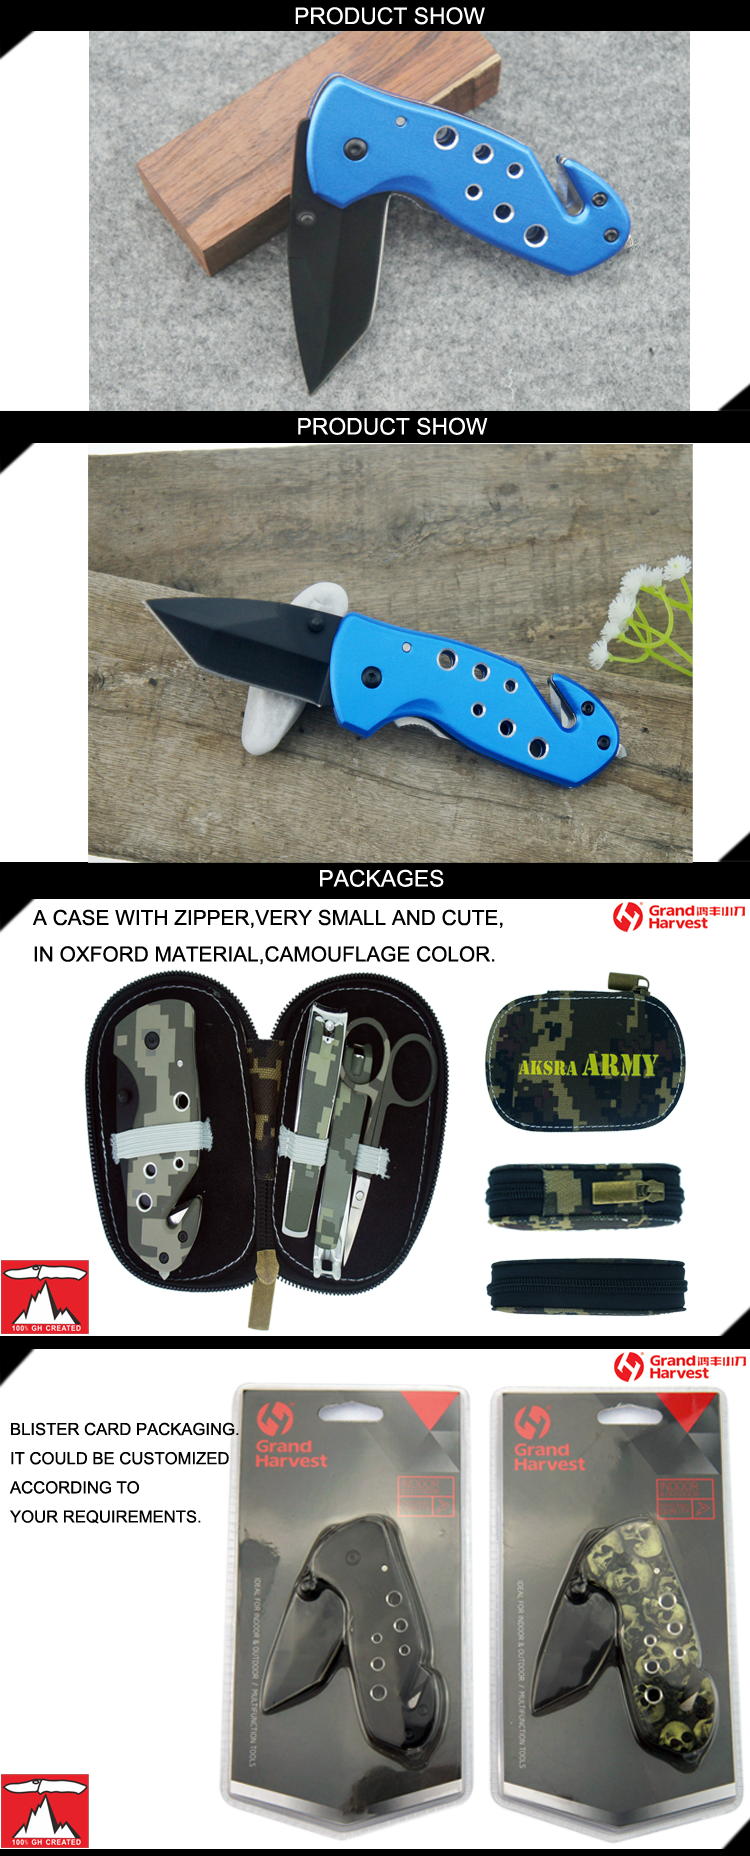 420 stainless steel folding pocket knife with black coating tanto blade W/ aluminum handle seat belt cutter and glass breaker